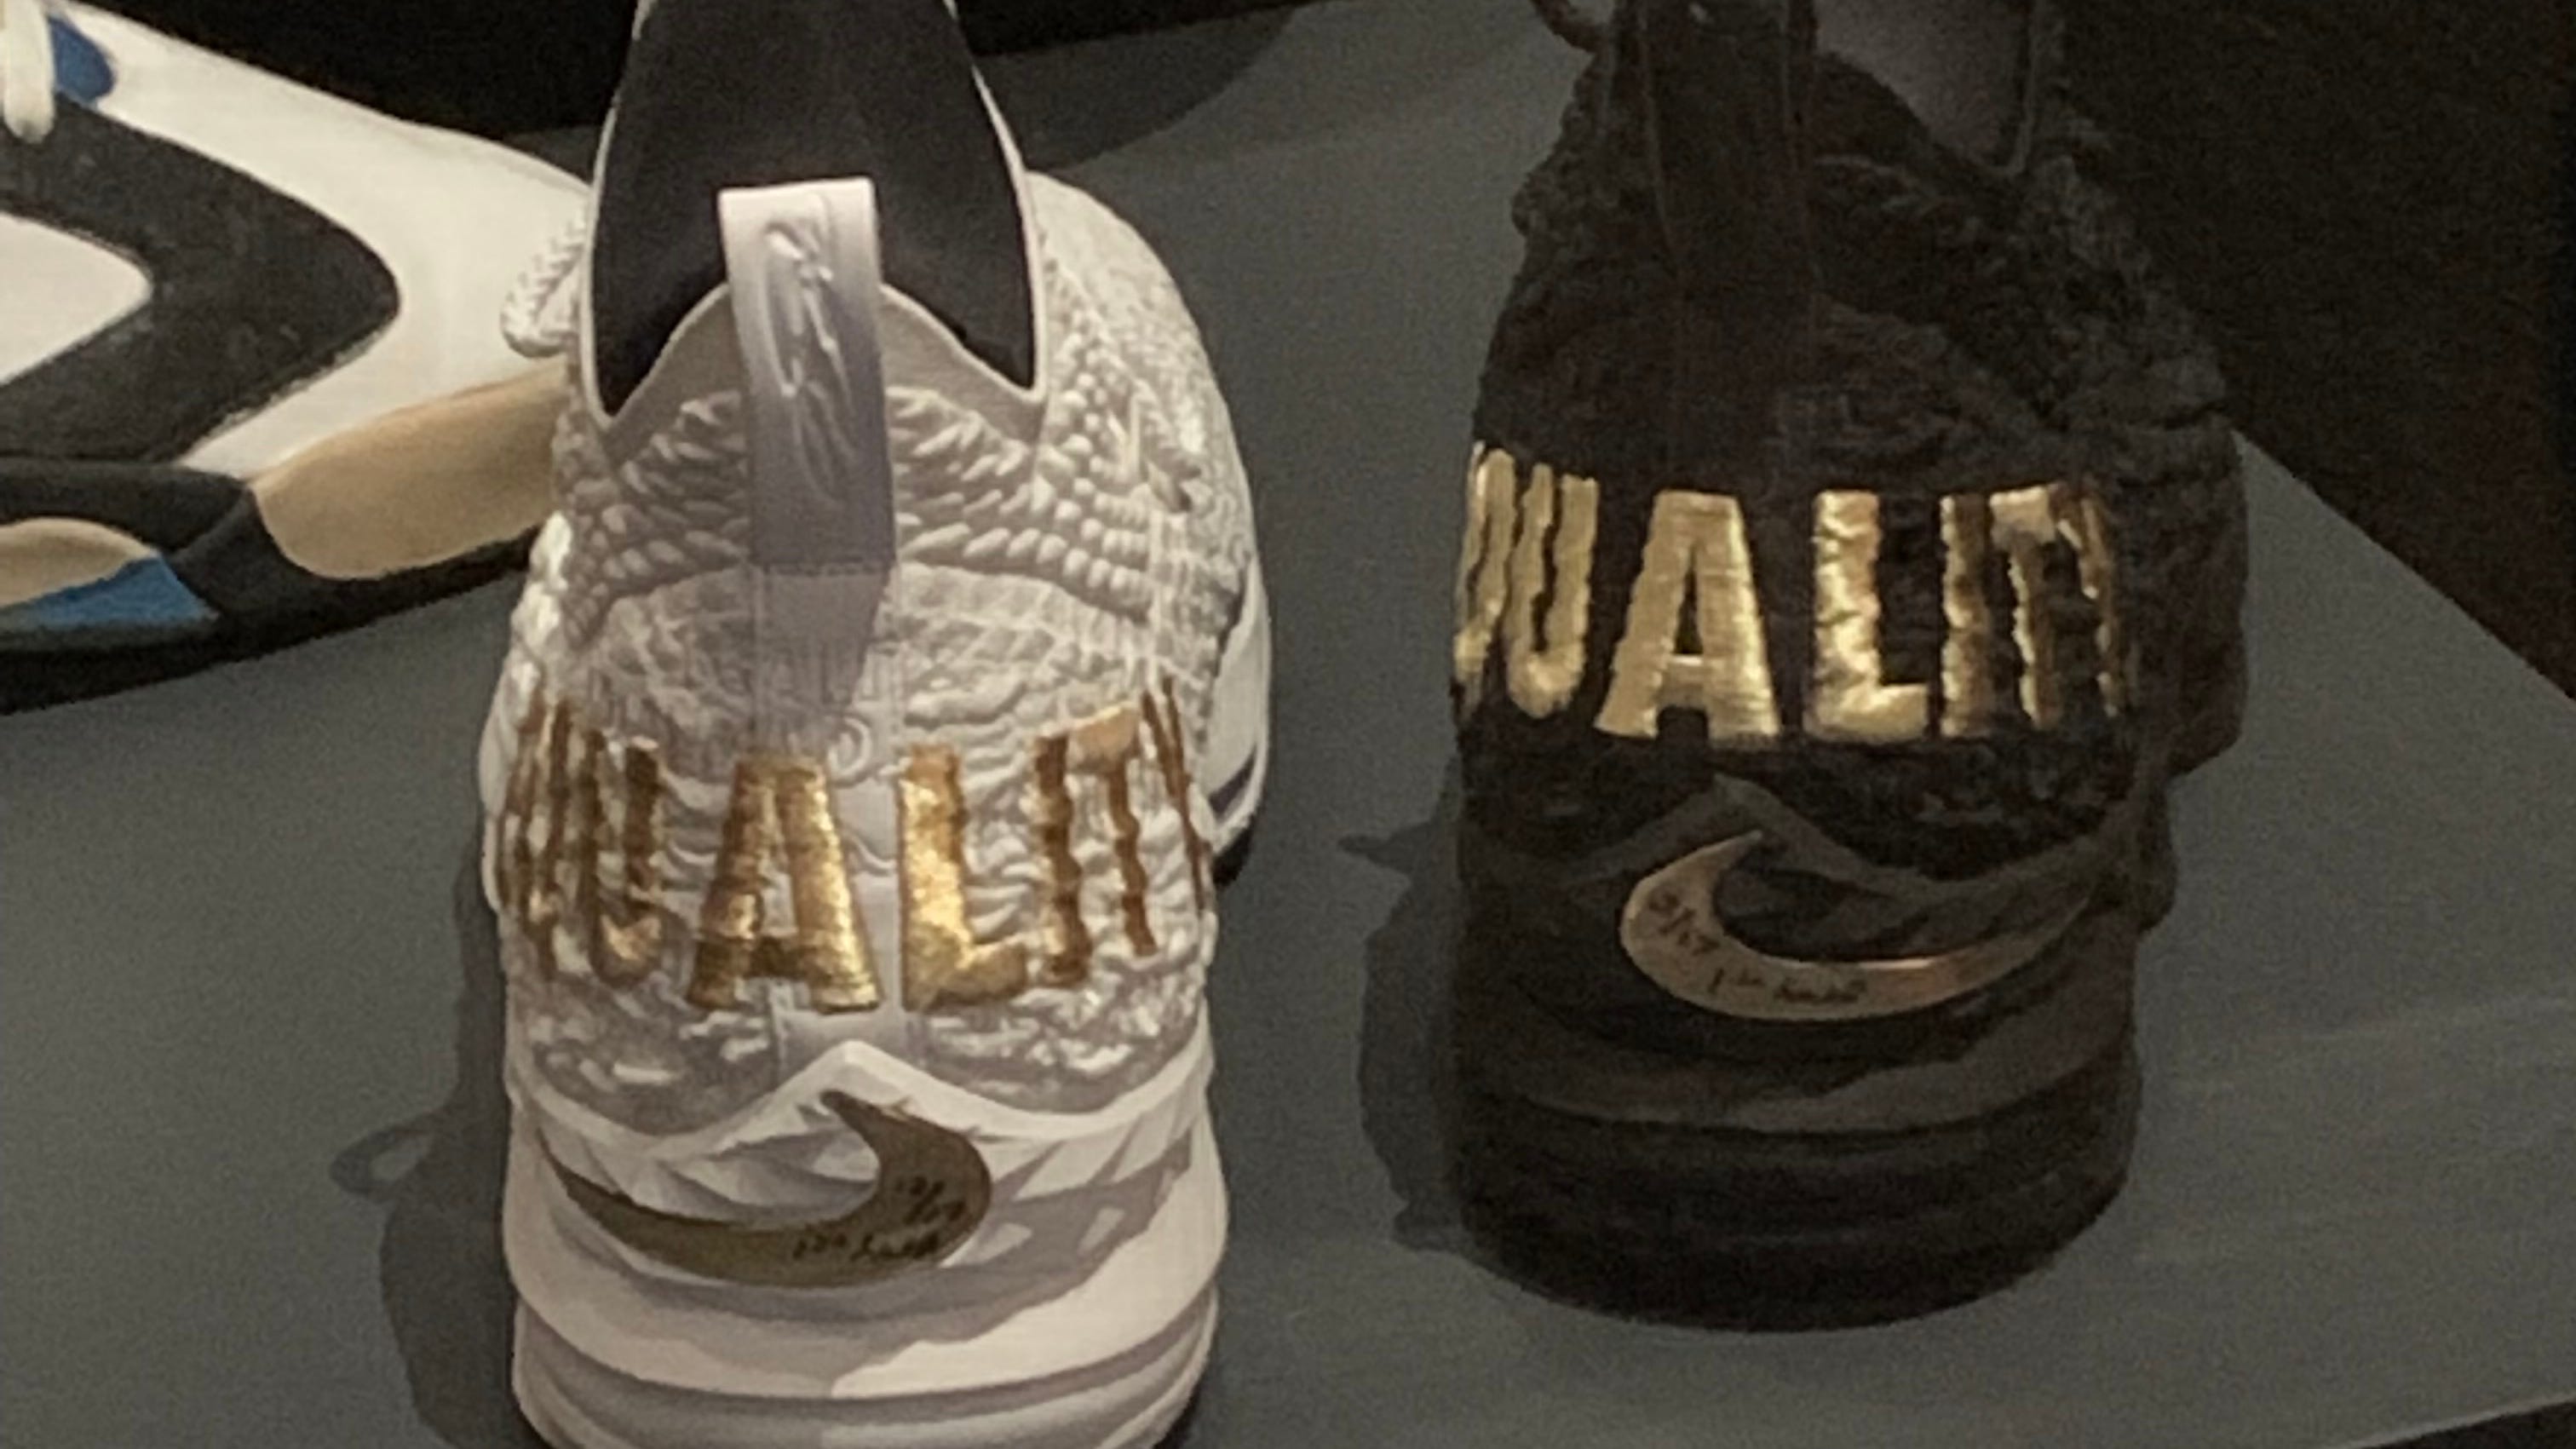 LeBron James: His game-worn Equality sneakers on display in museum